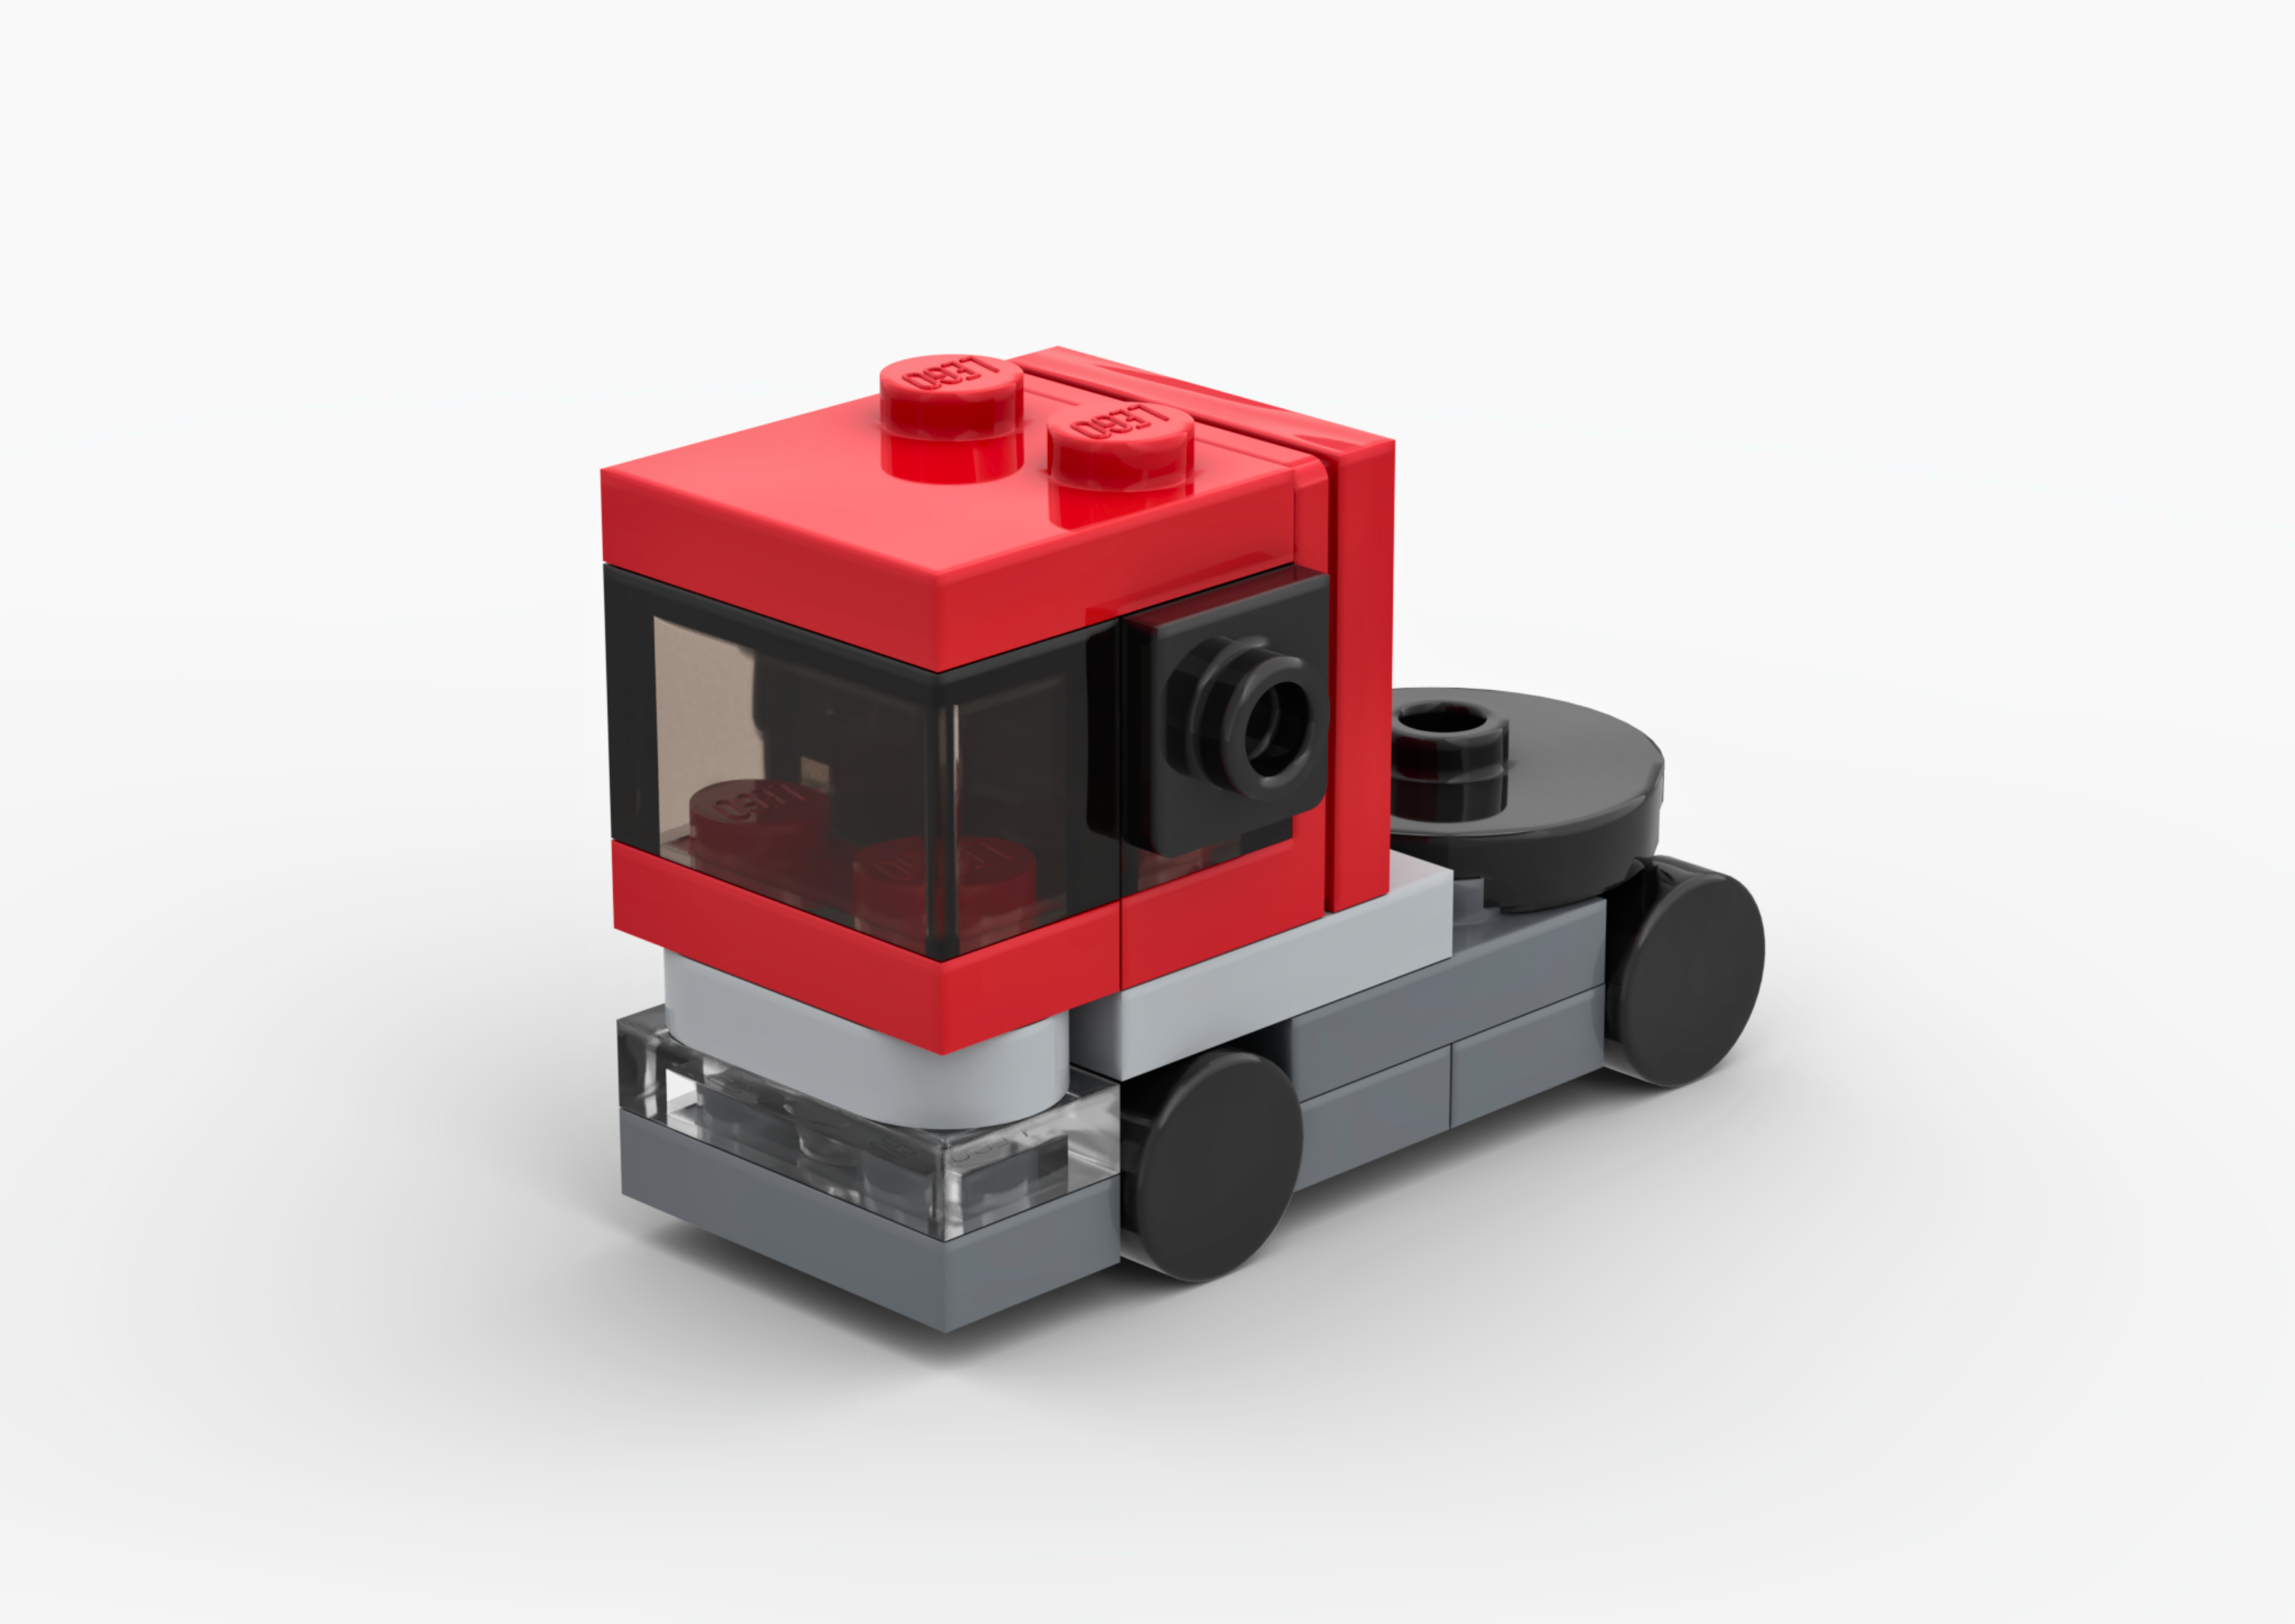 3D rendered image of the LEGO Micro Renault Magnum Truck MOC.